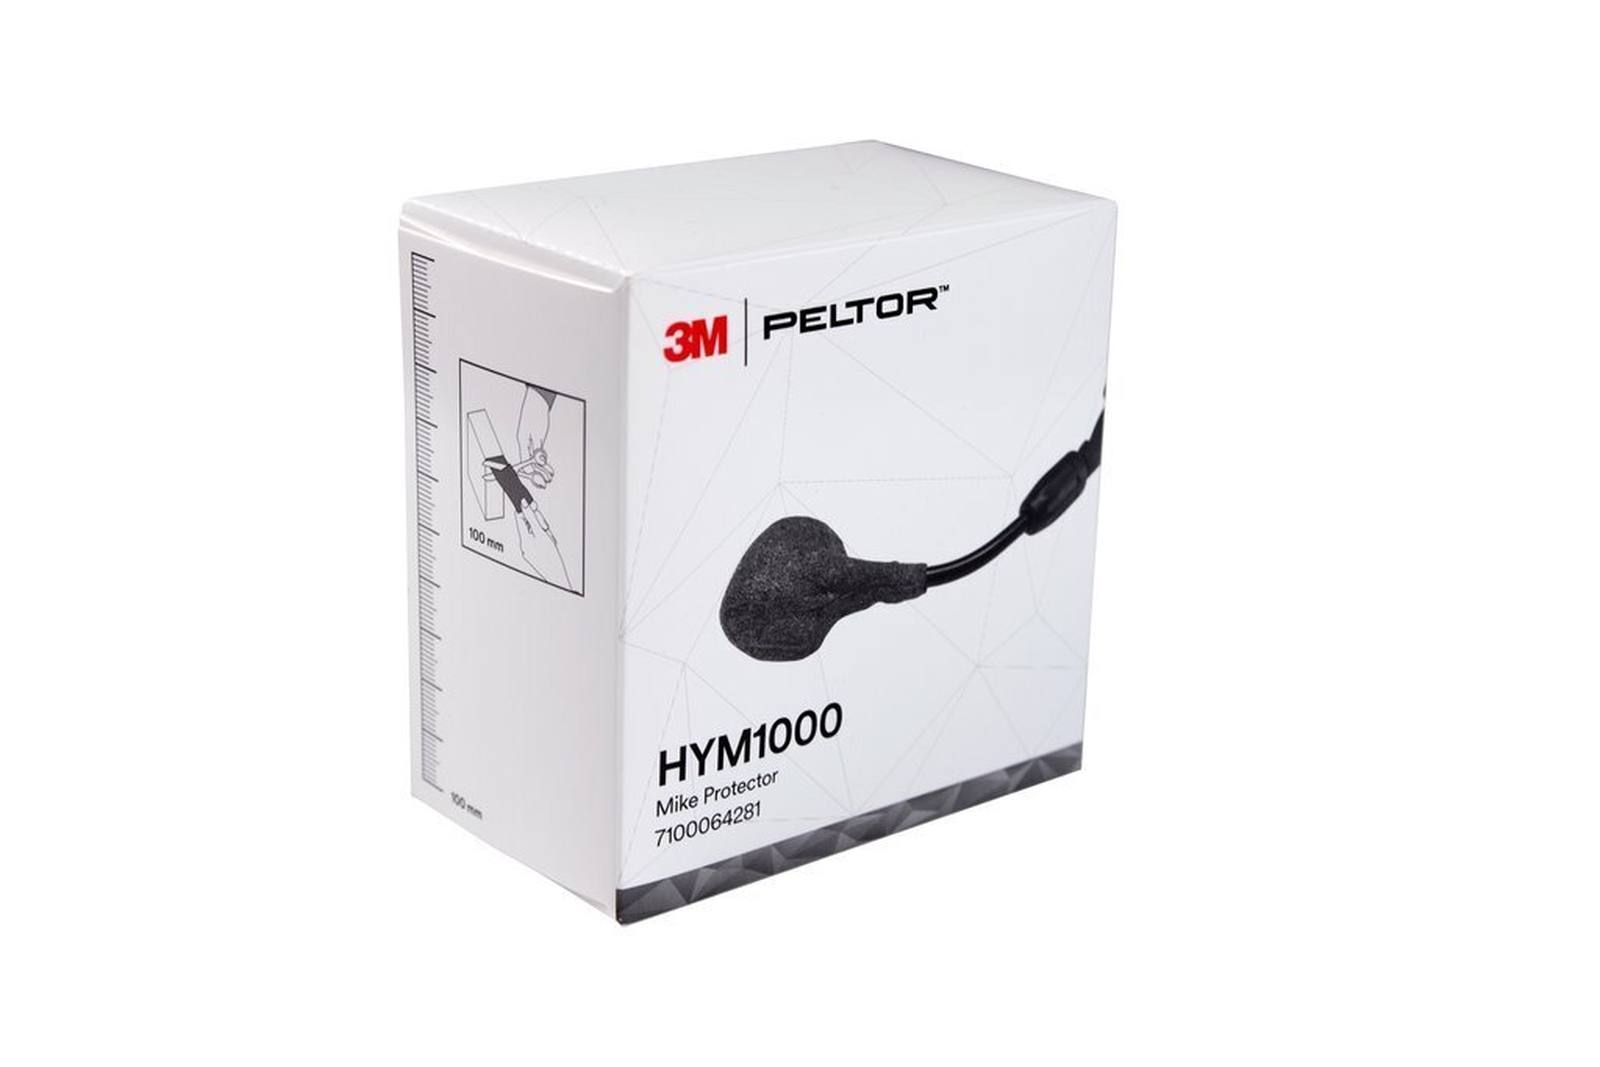 3M Peltor Microphone Protection Tape, 5 m roll, gray, HYM1000